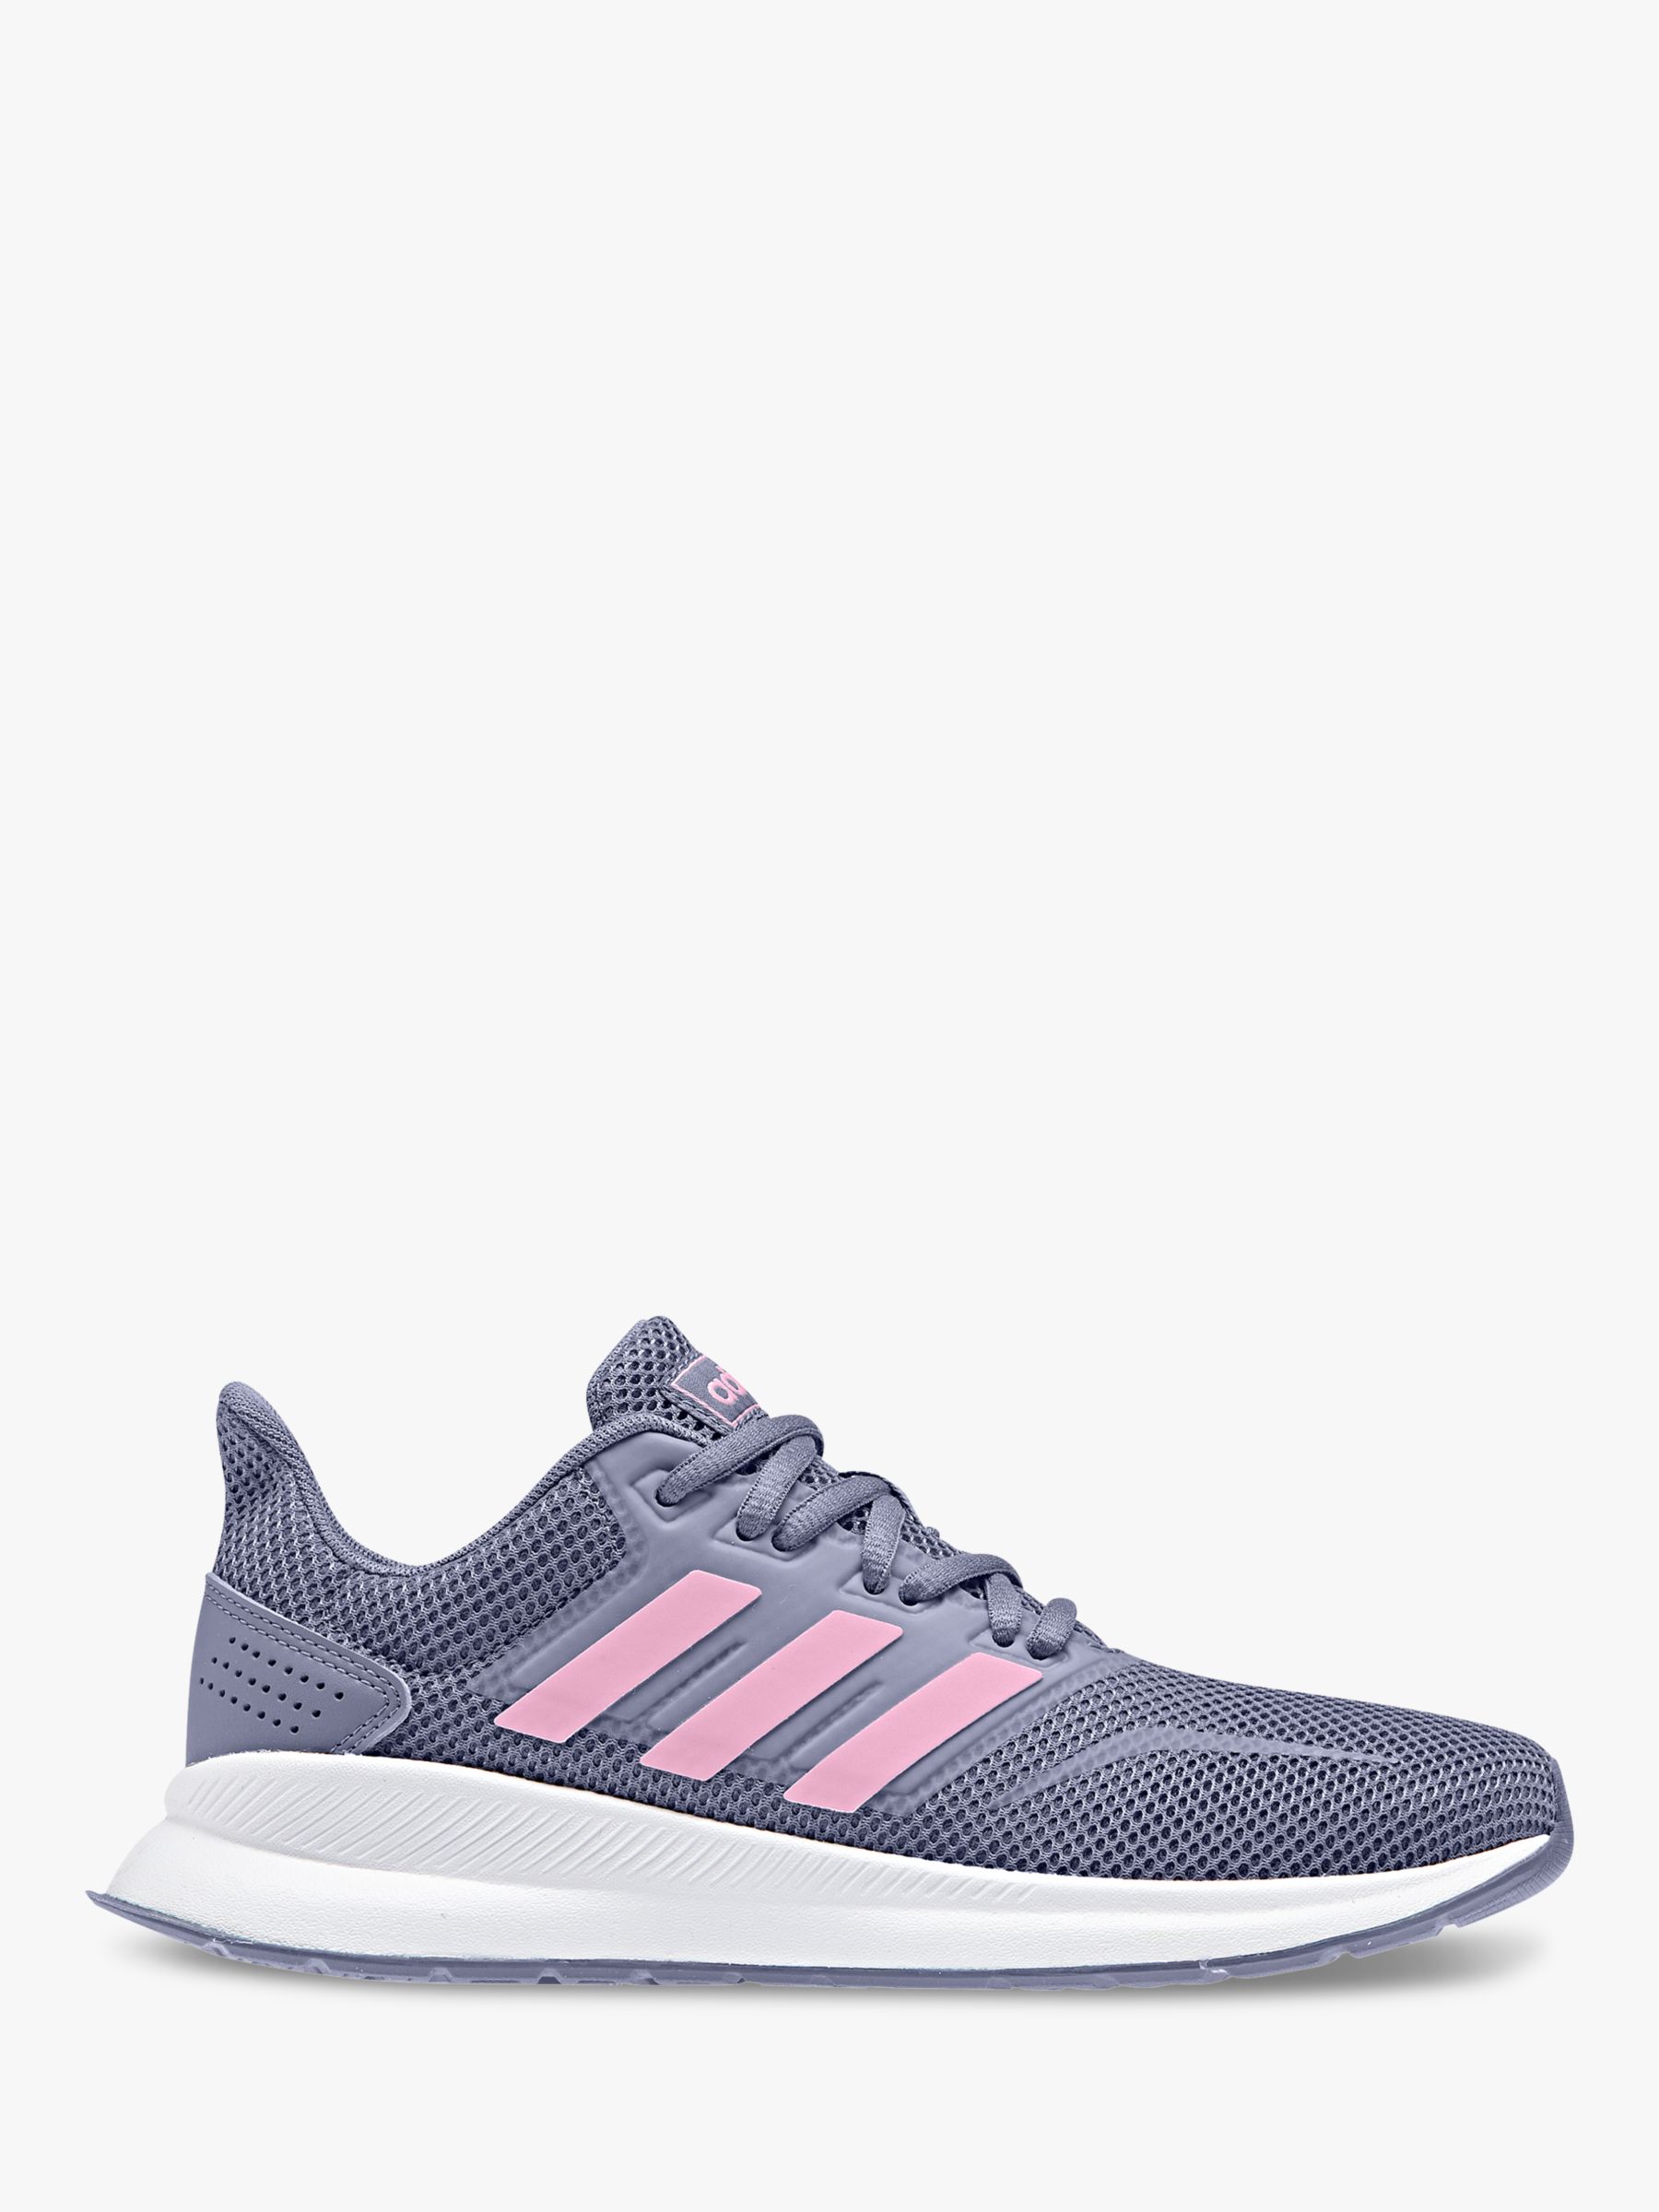 adidas trainers grey and pink